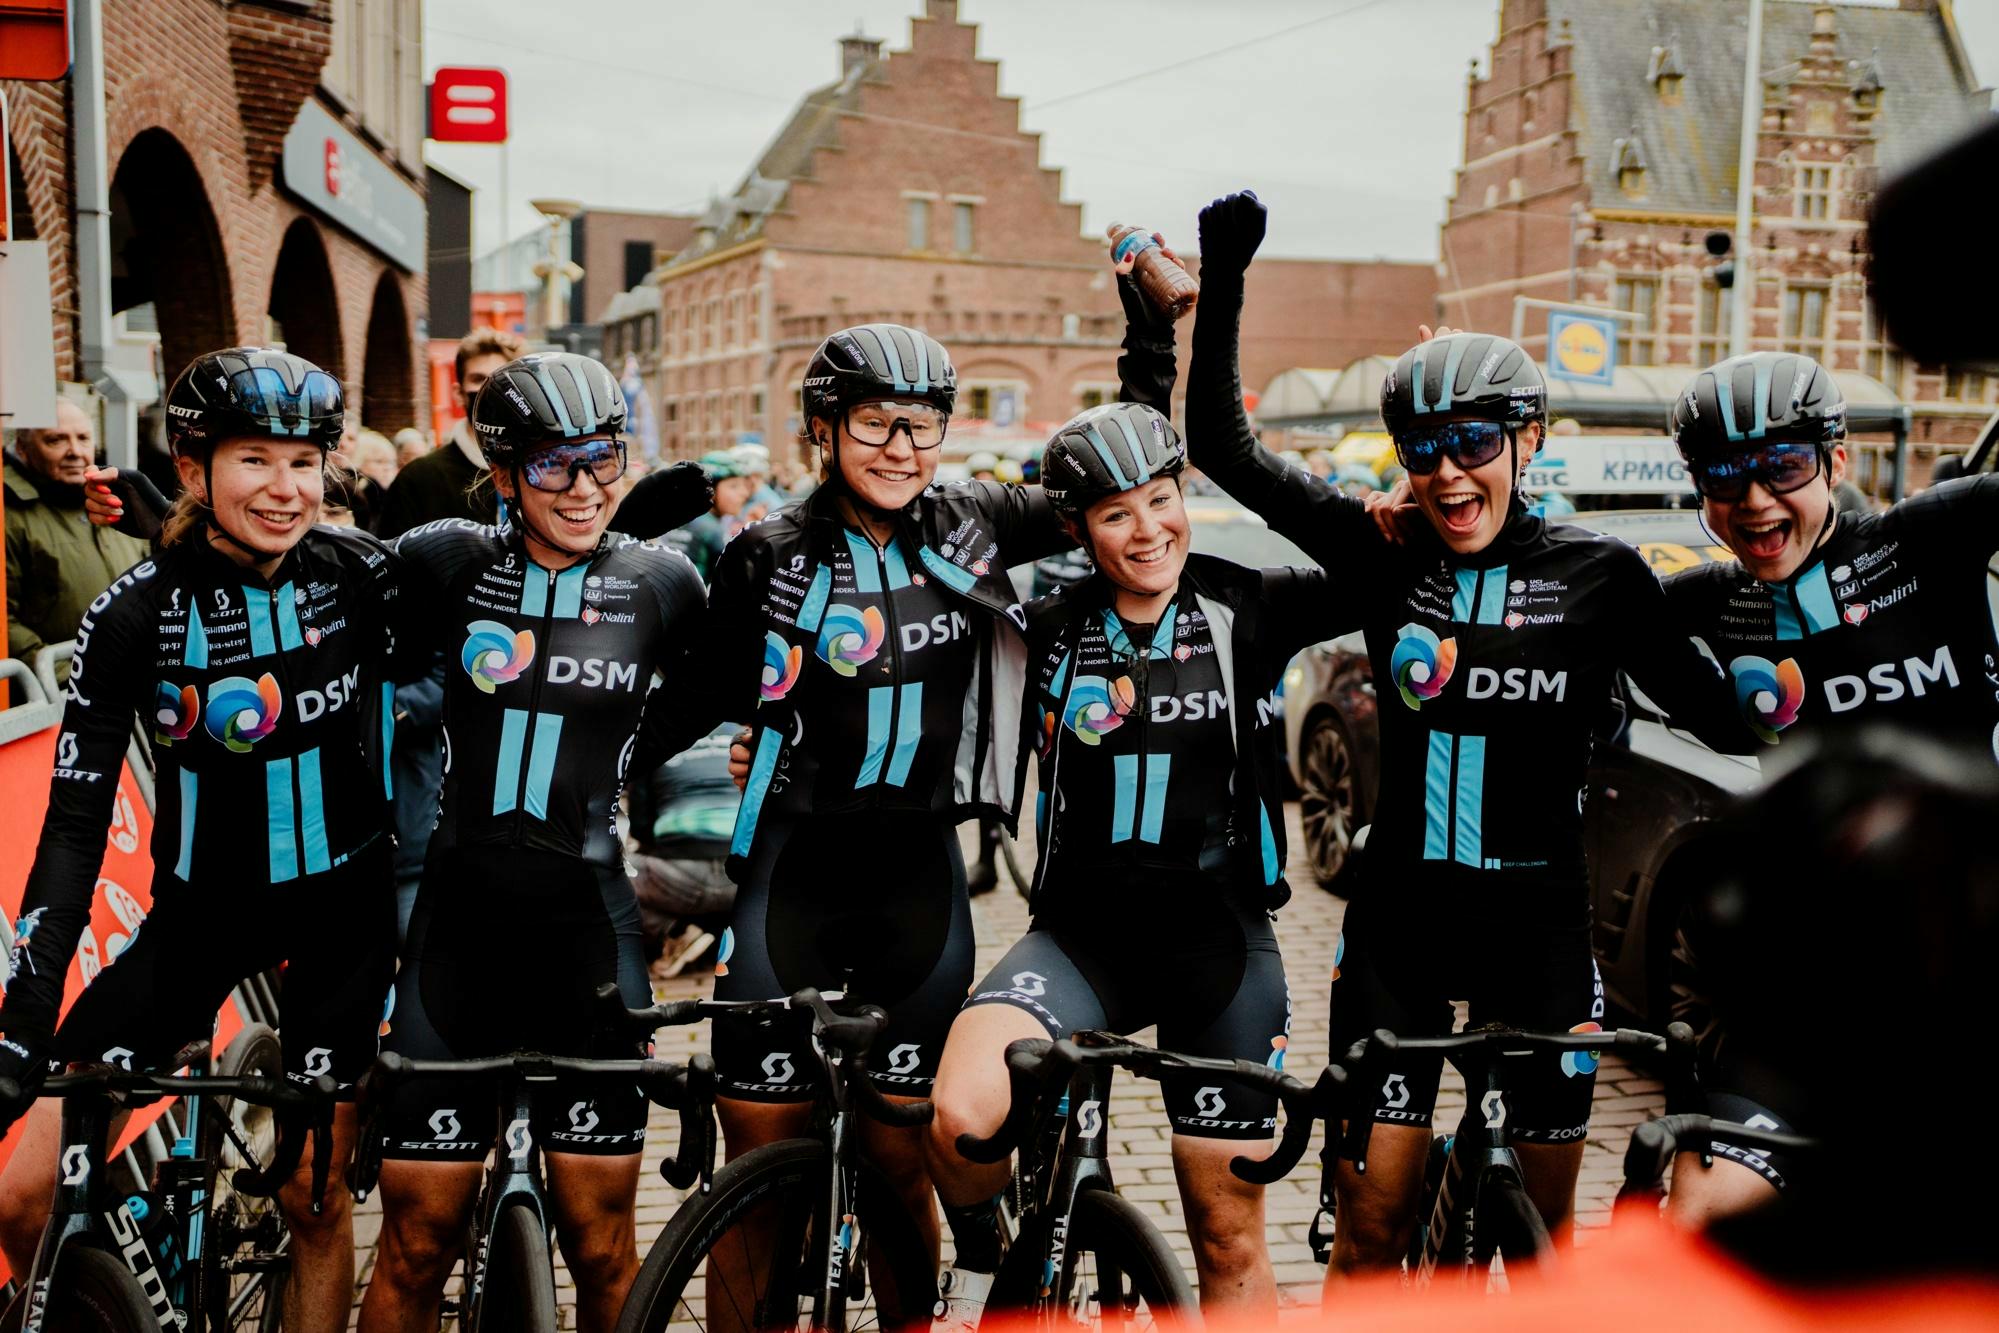 Follow the women's race thanks to the Proximus livestream